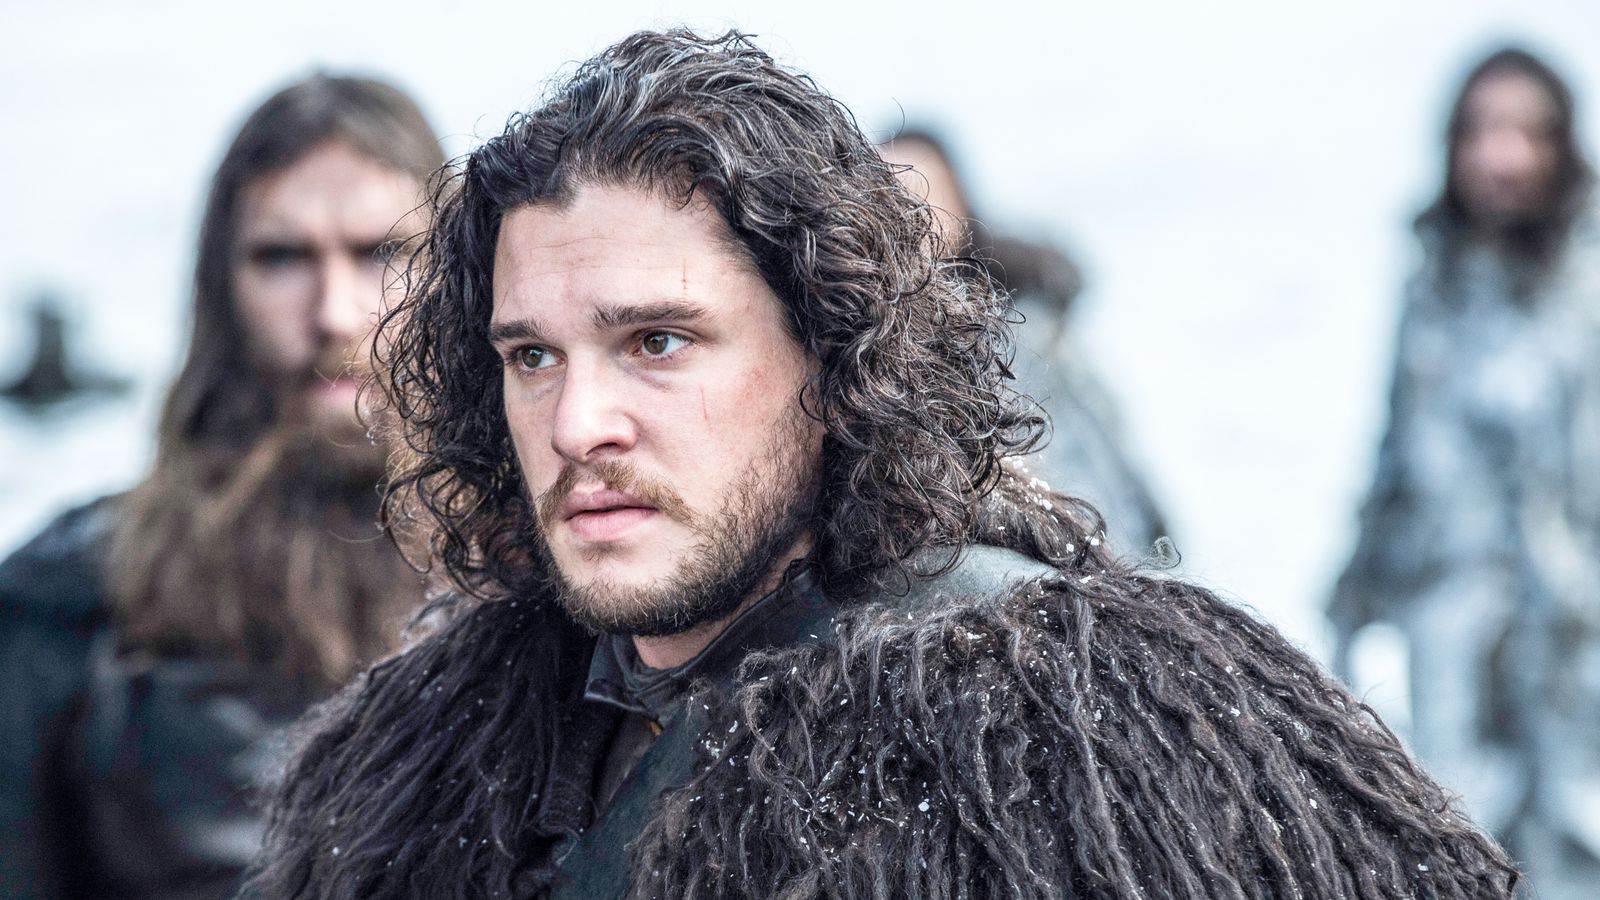 Game Of Thrones actor Kit Harington opens up about his battle with alcohol before his son’s birth